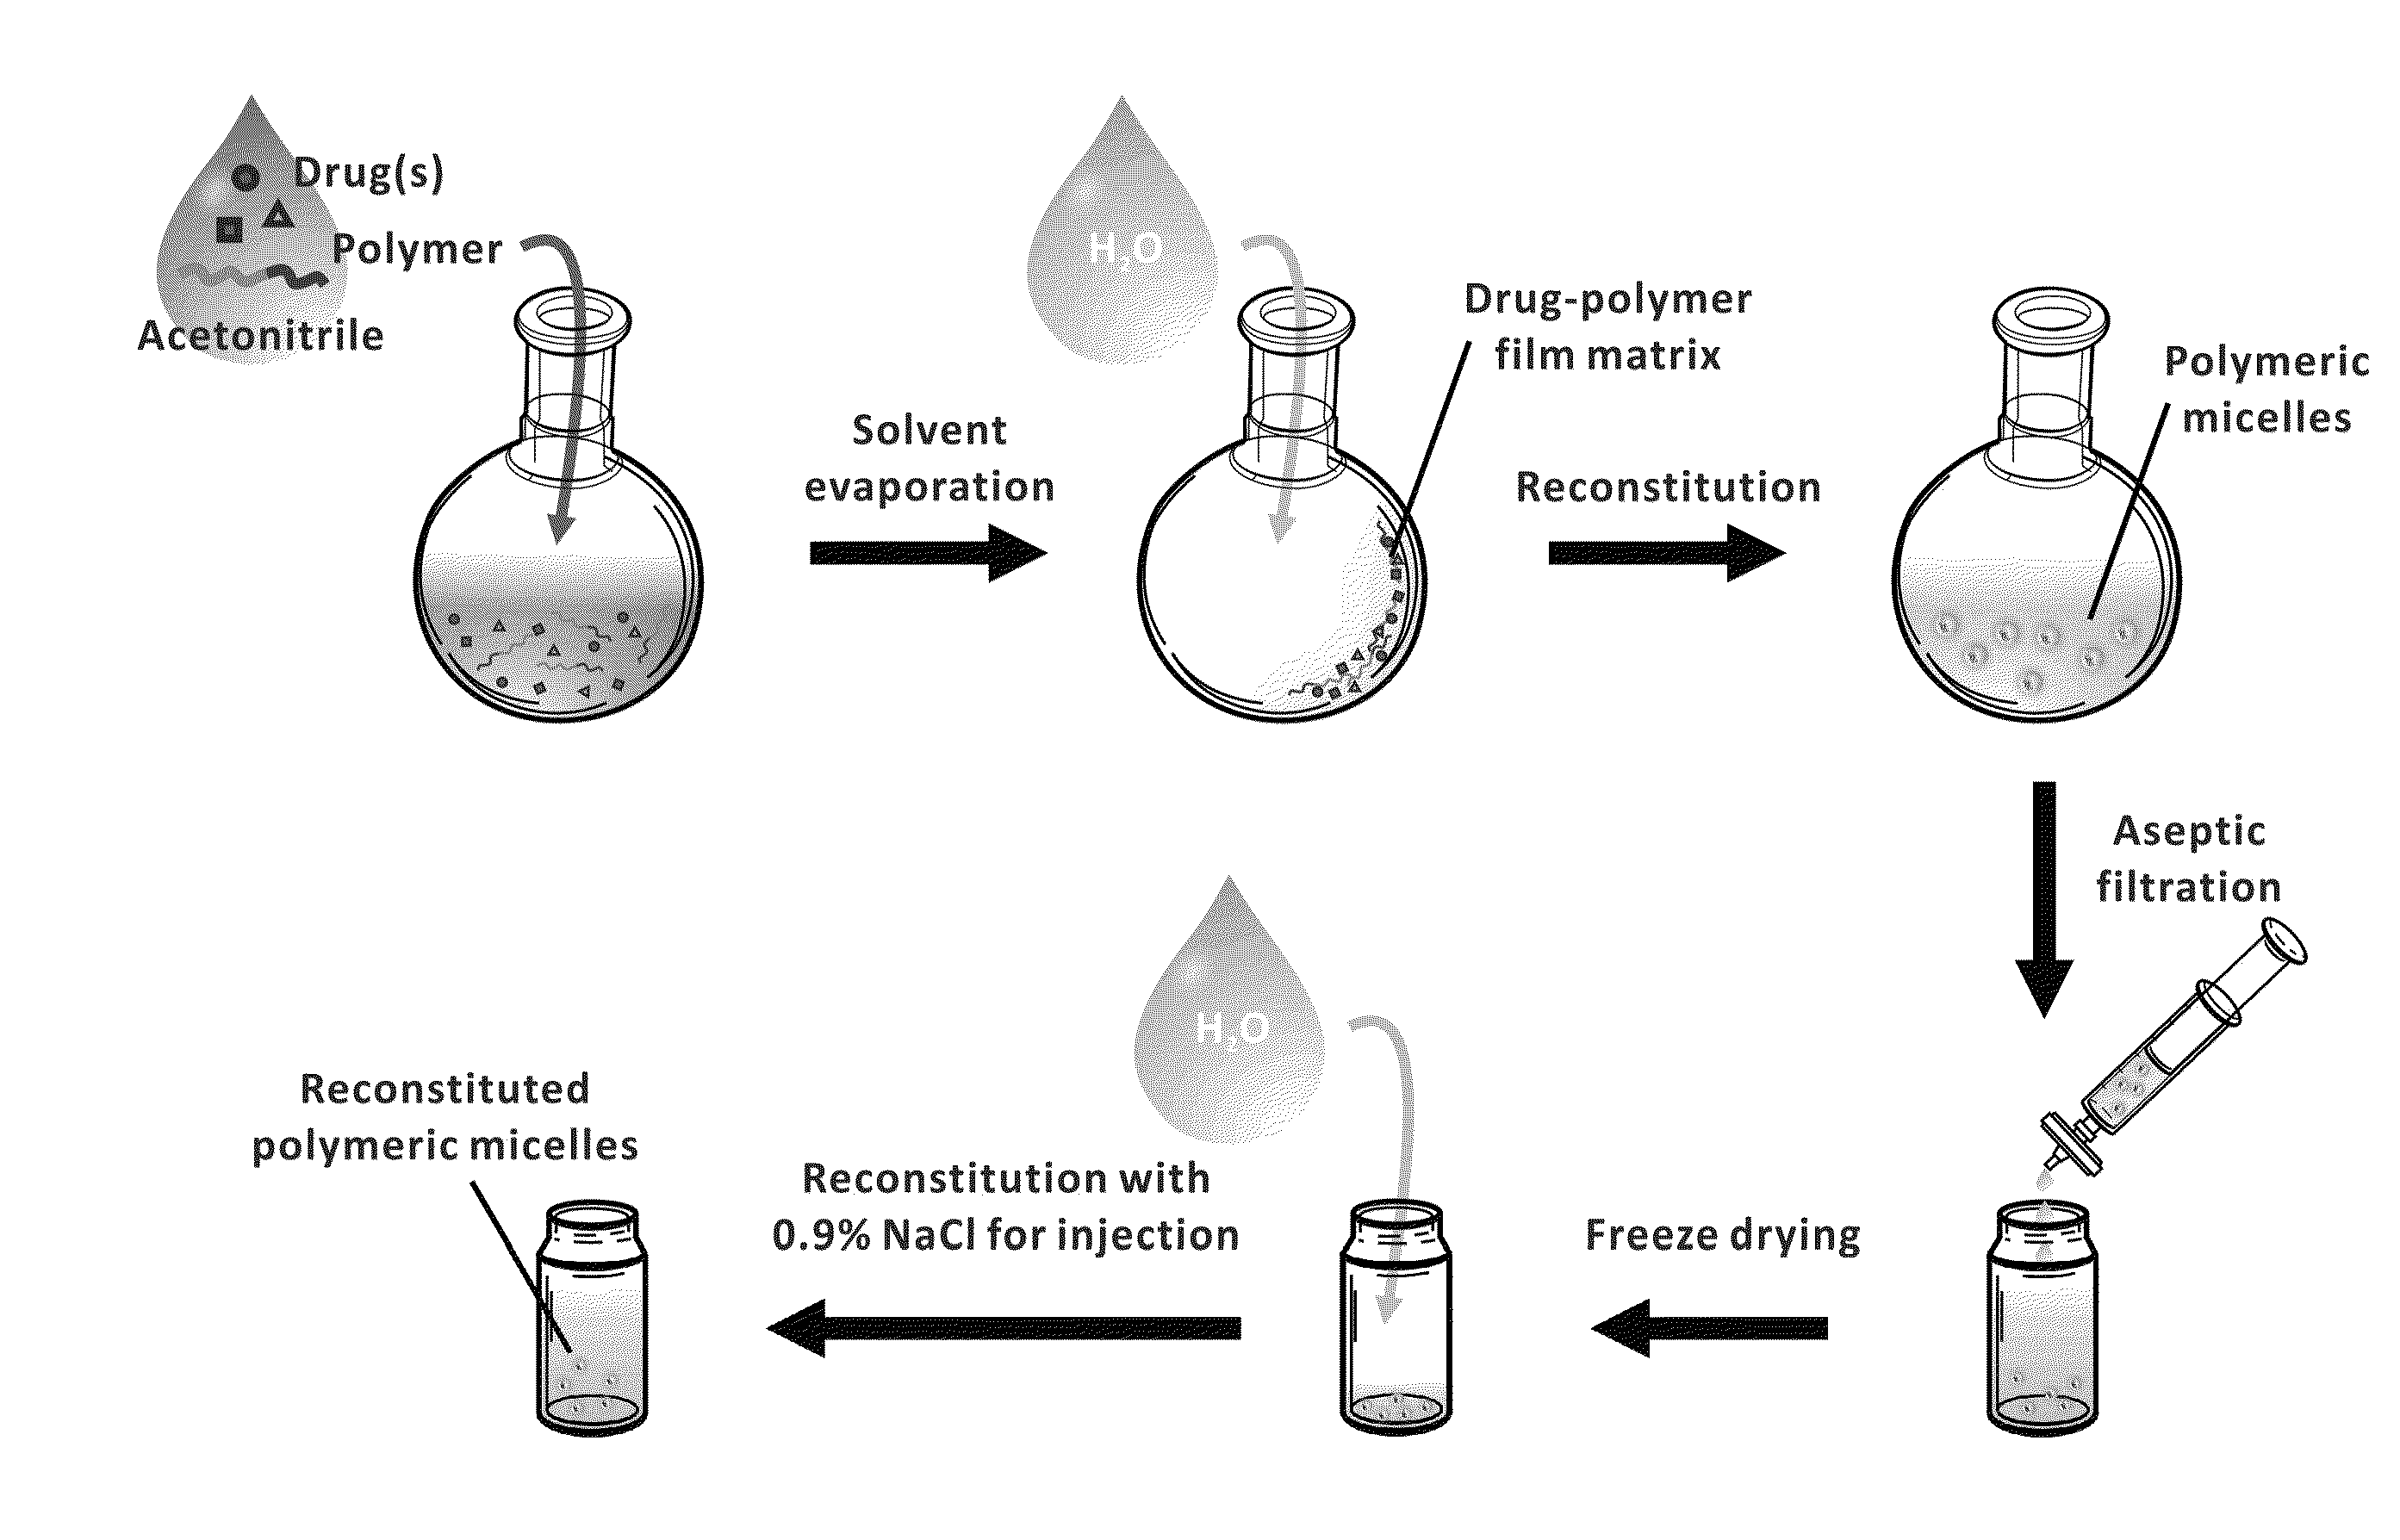 Micelle encapsulation of therapeutic agents